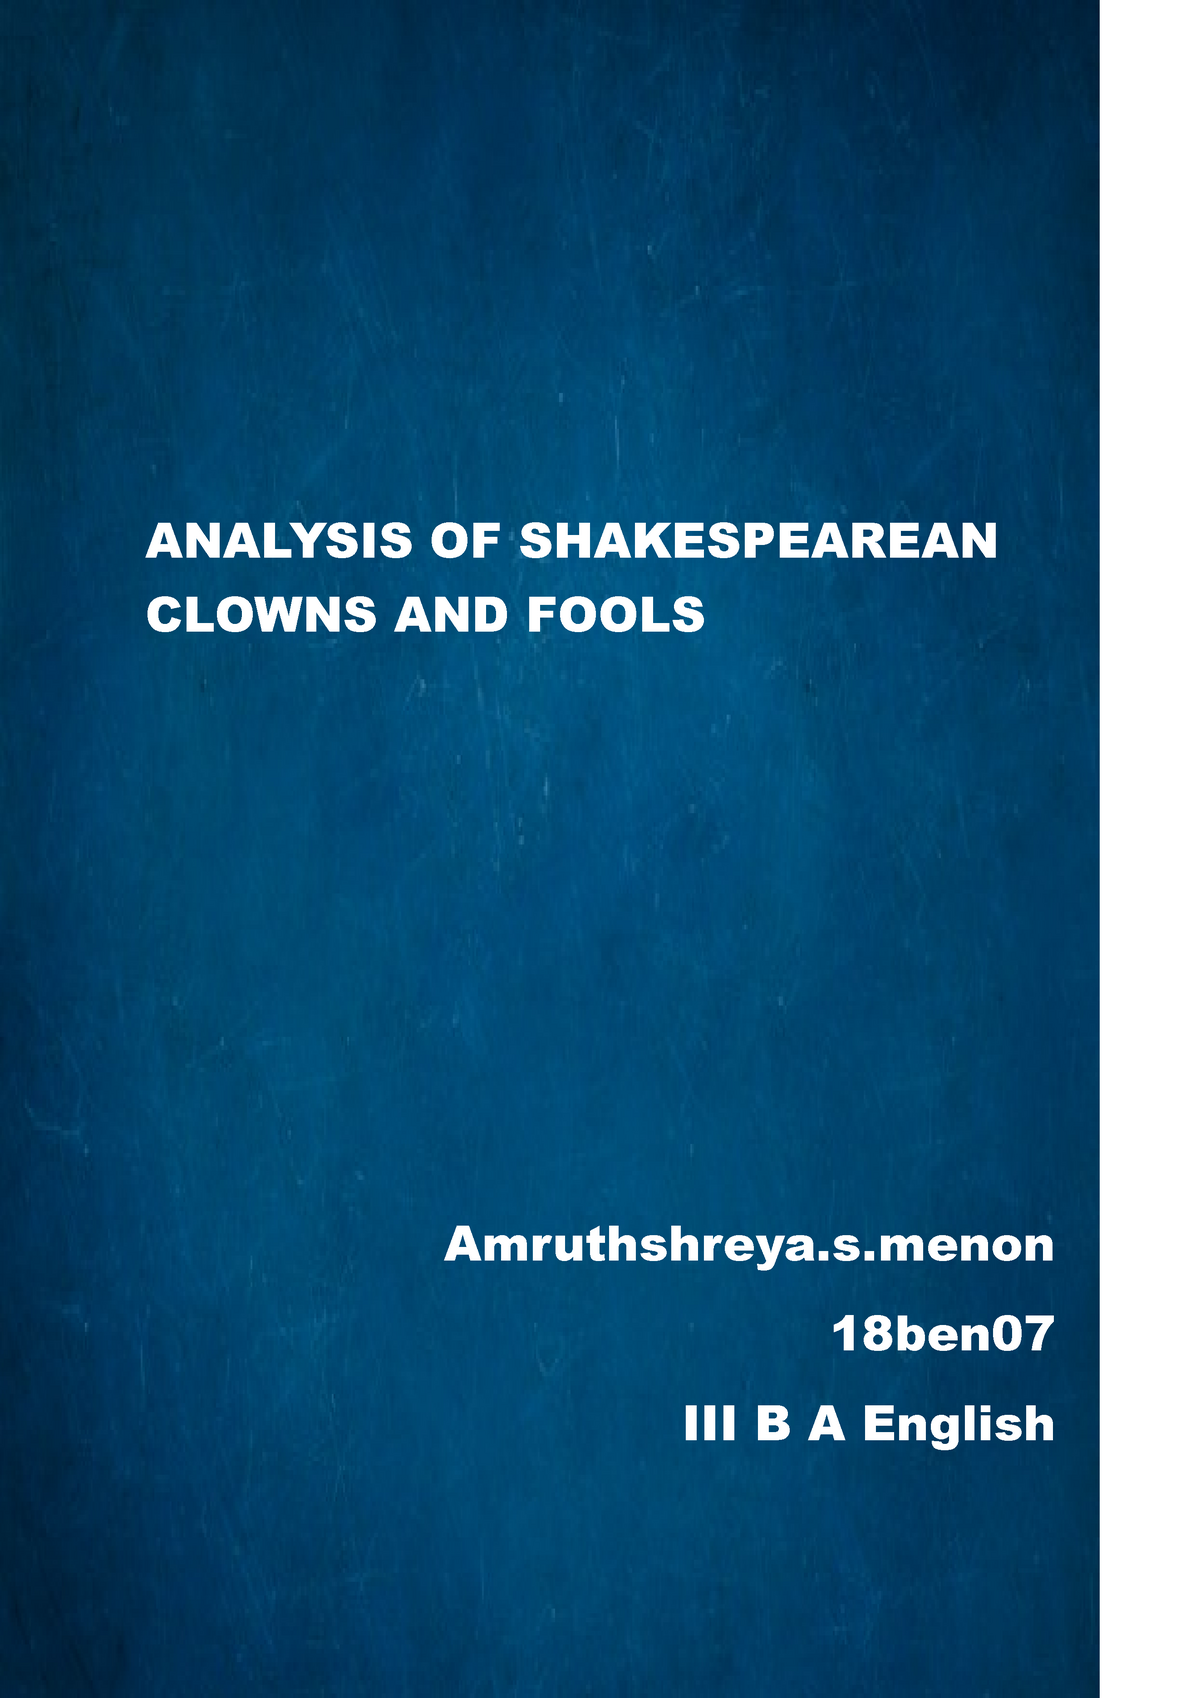 shakespeare fools and clowns essay